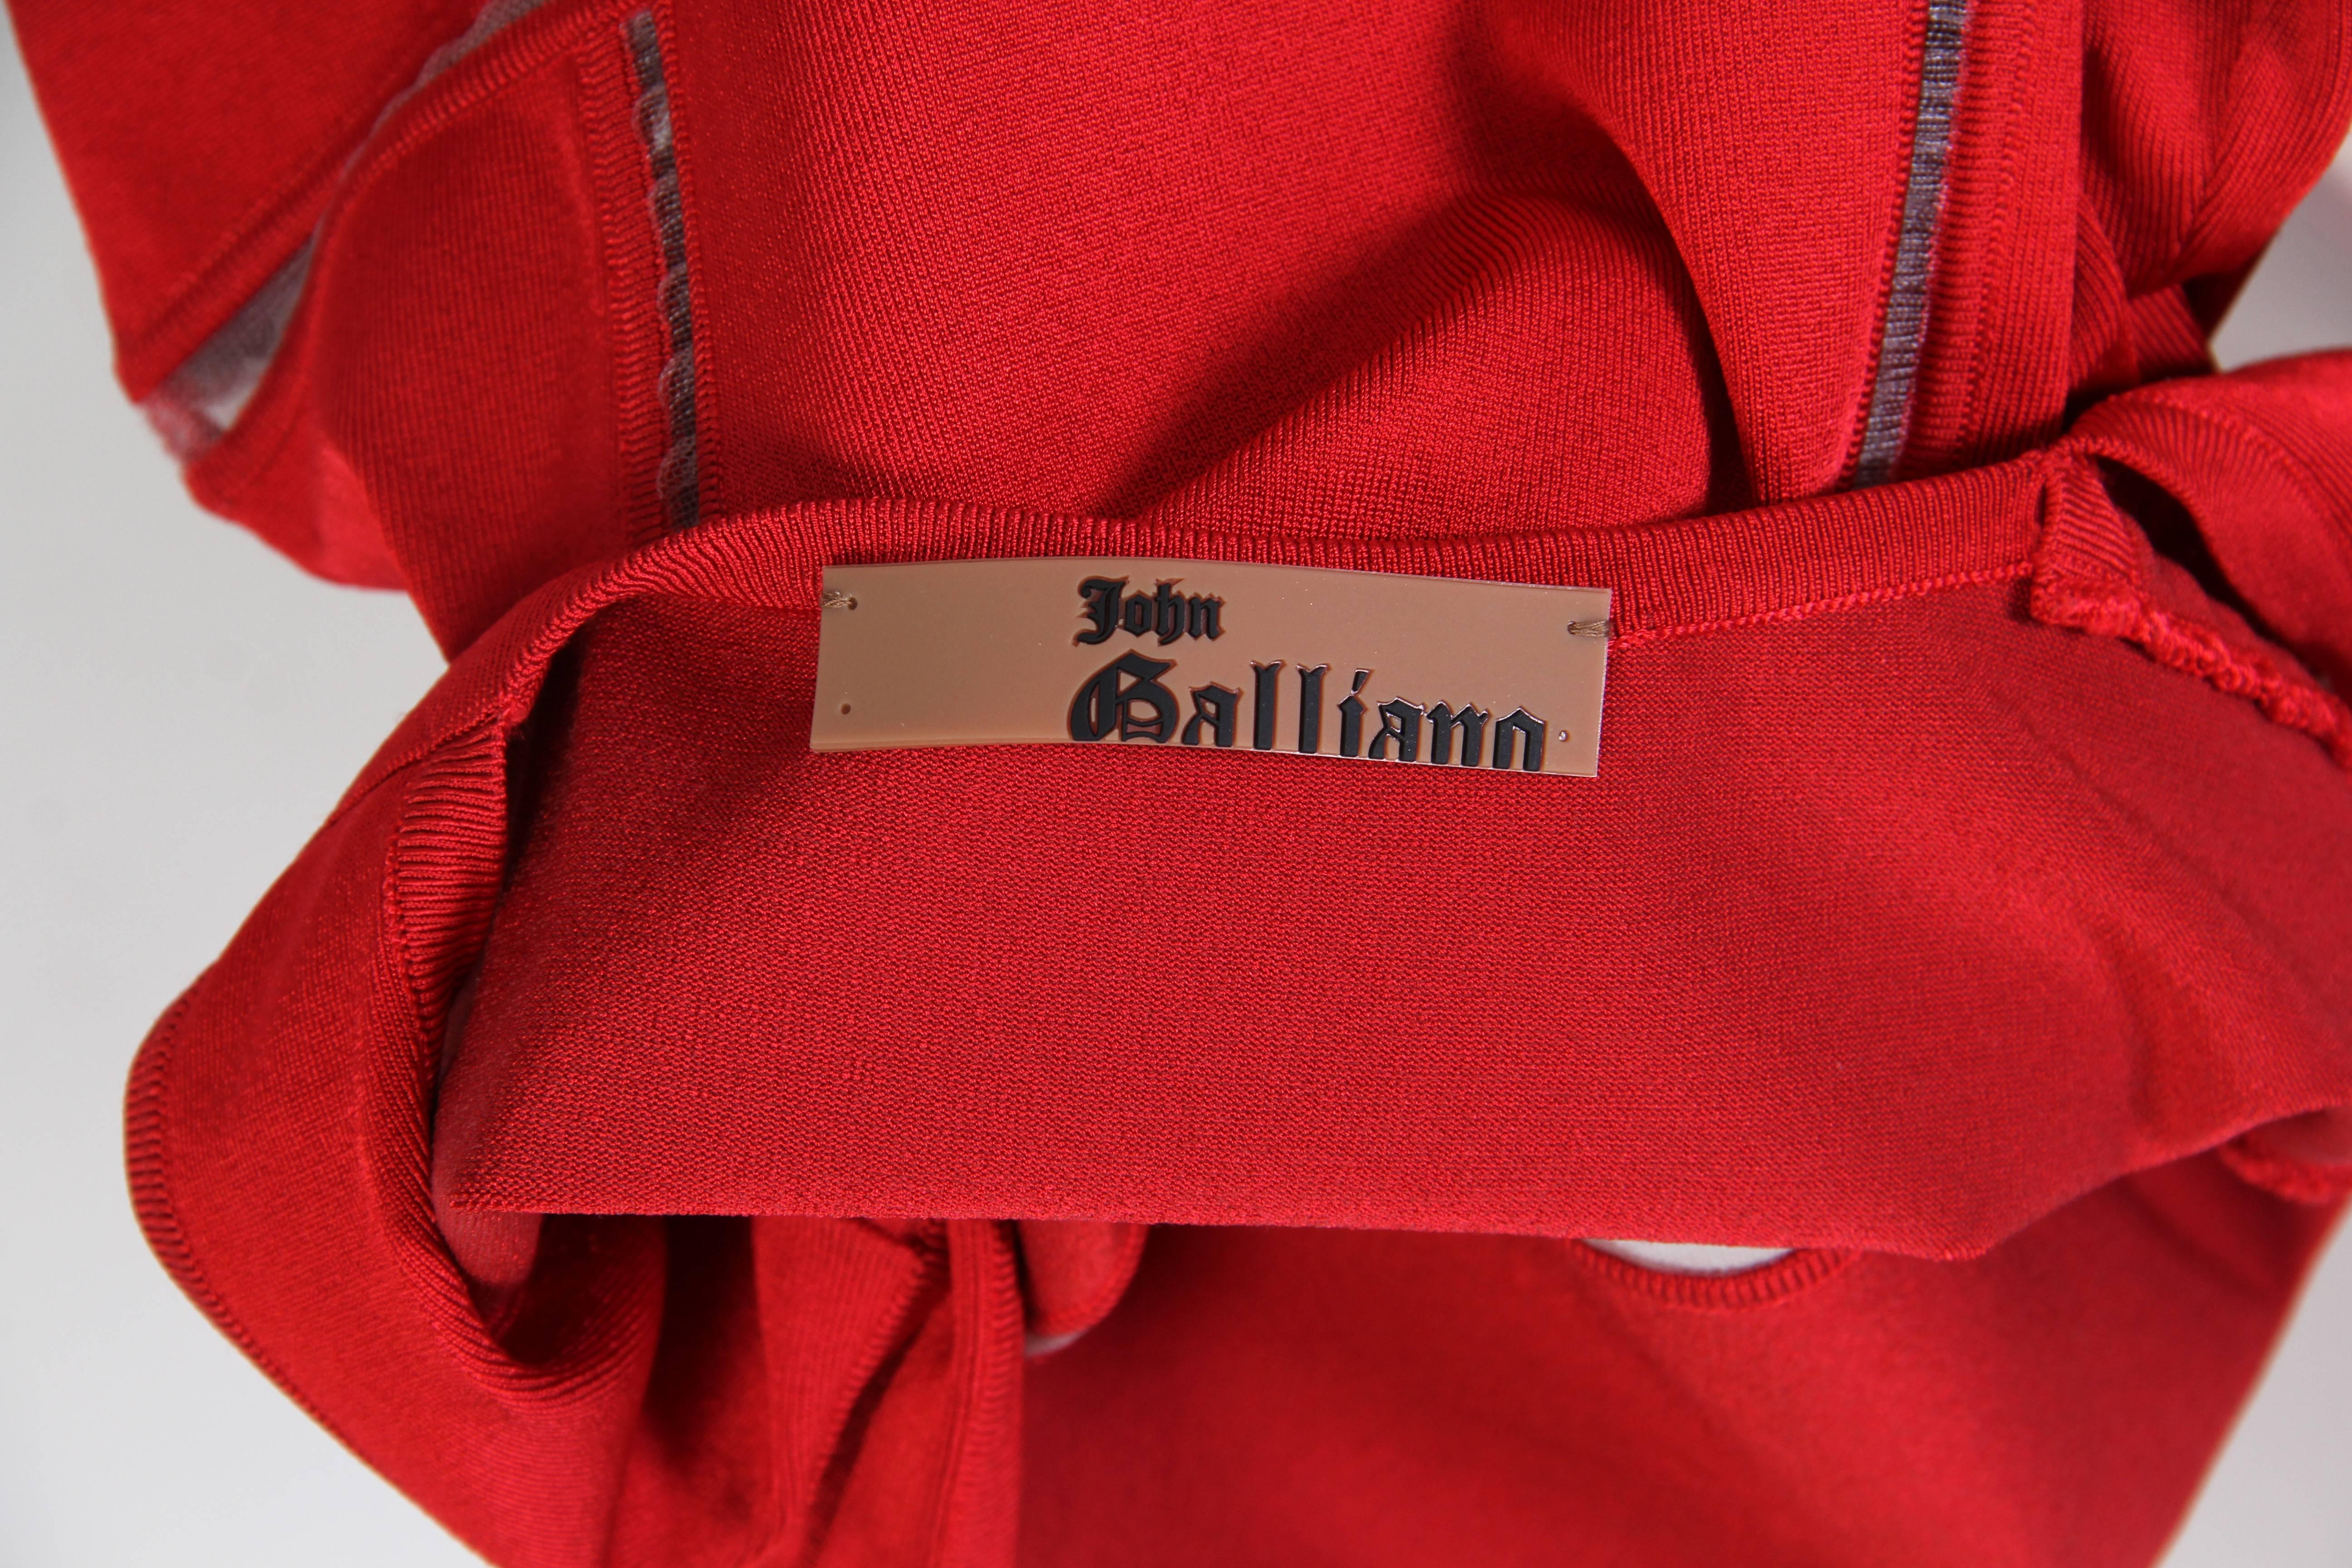 2000S JOHN GALLIANO Red Rayon Blend Knit Ruffled Skirt Cocktail Dress For Sale 3